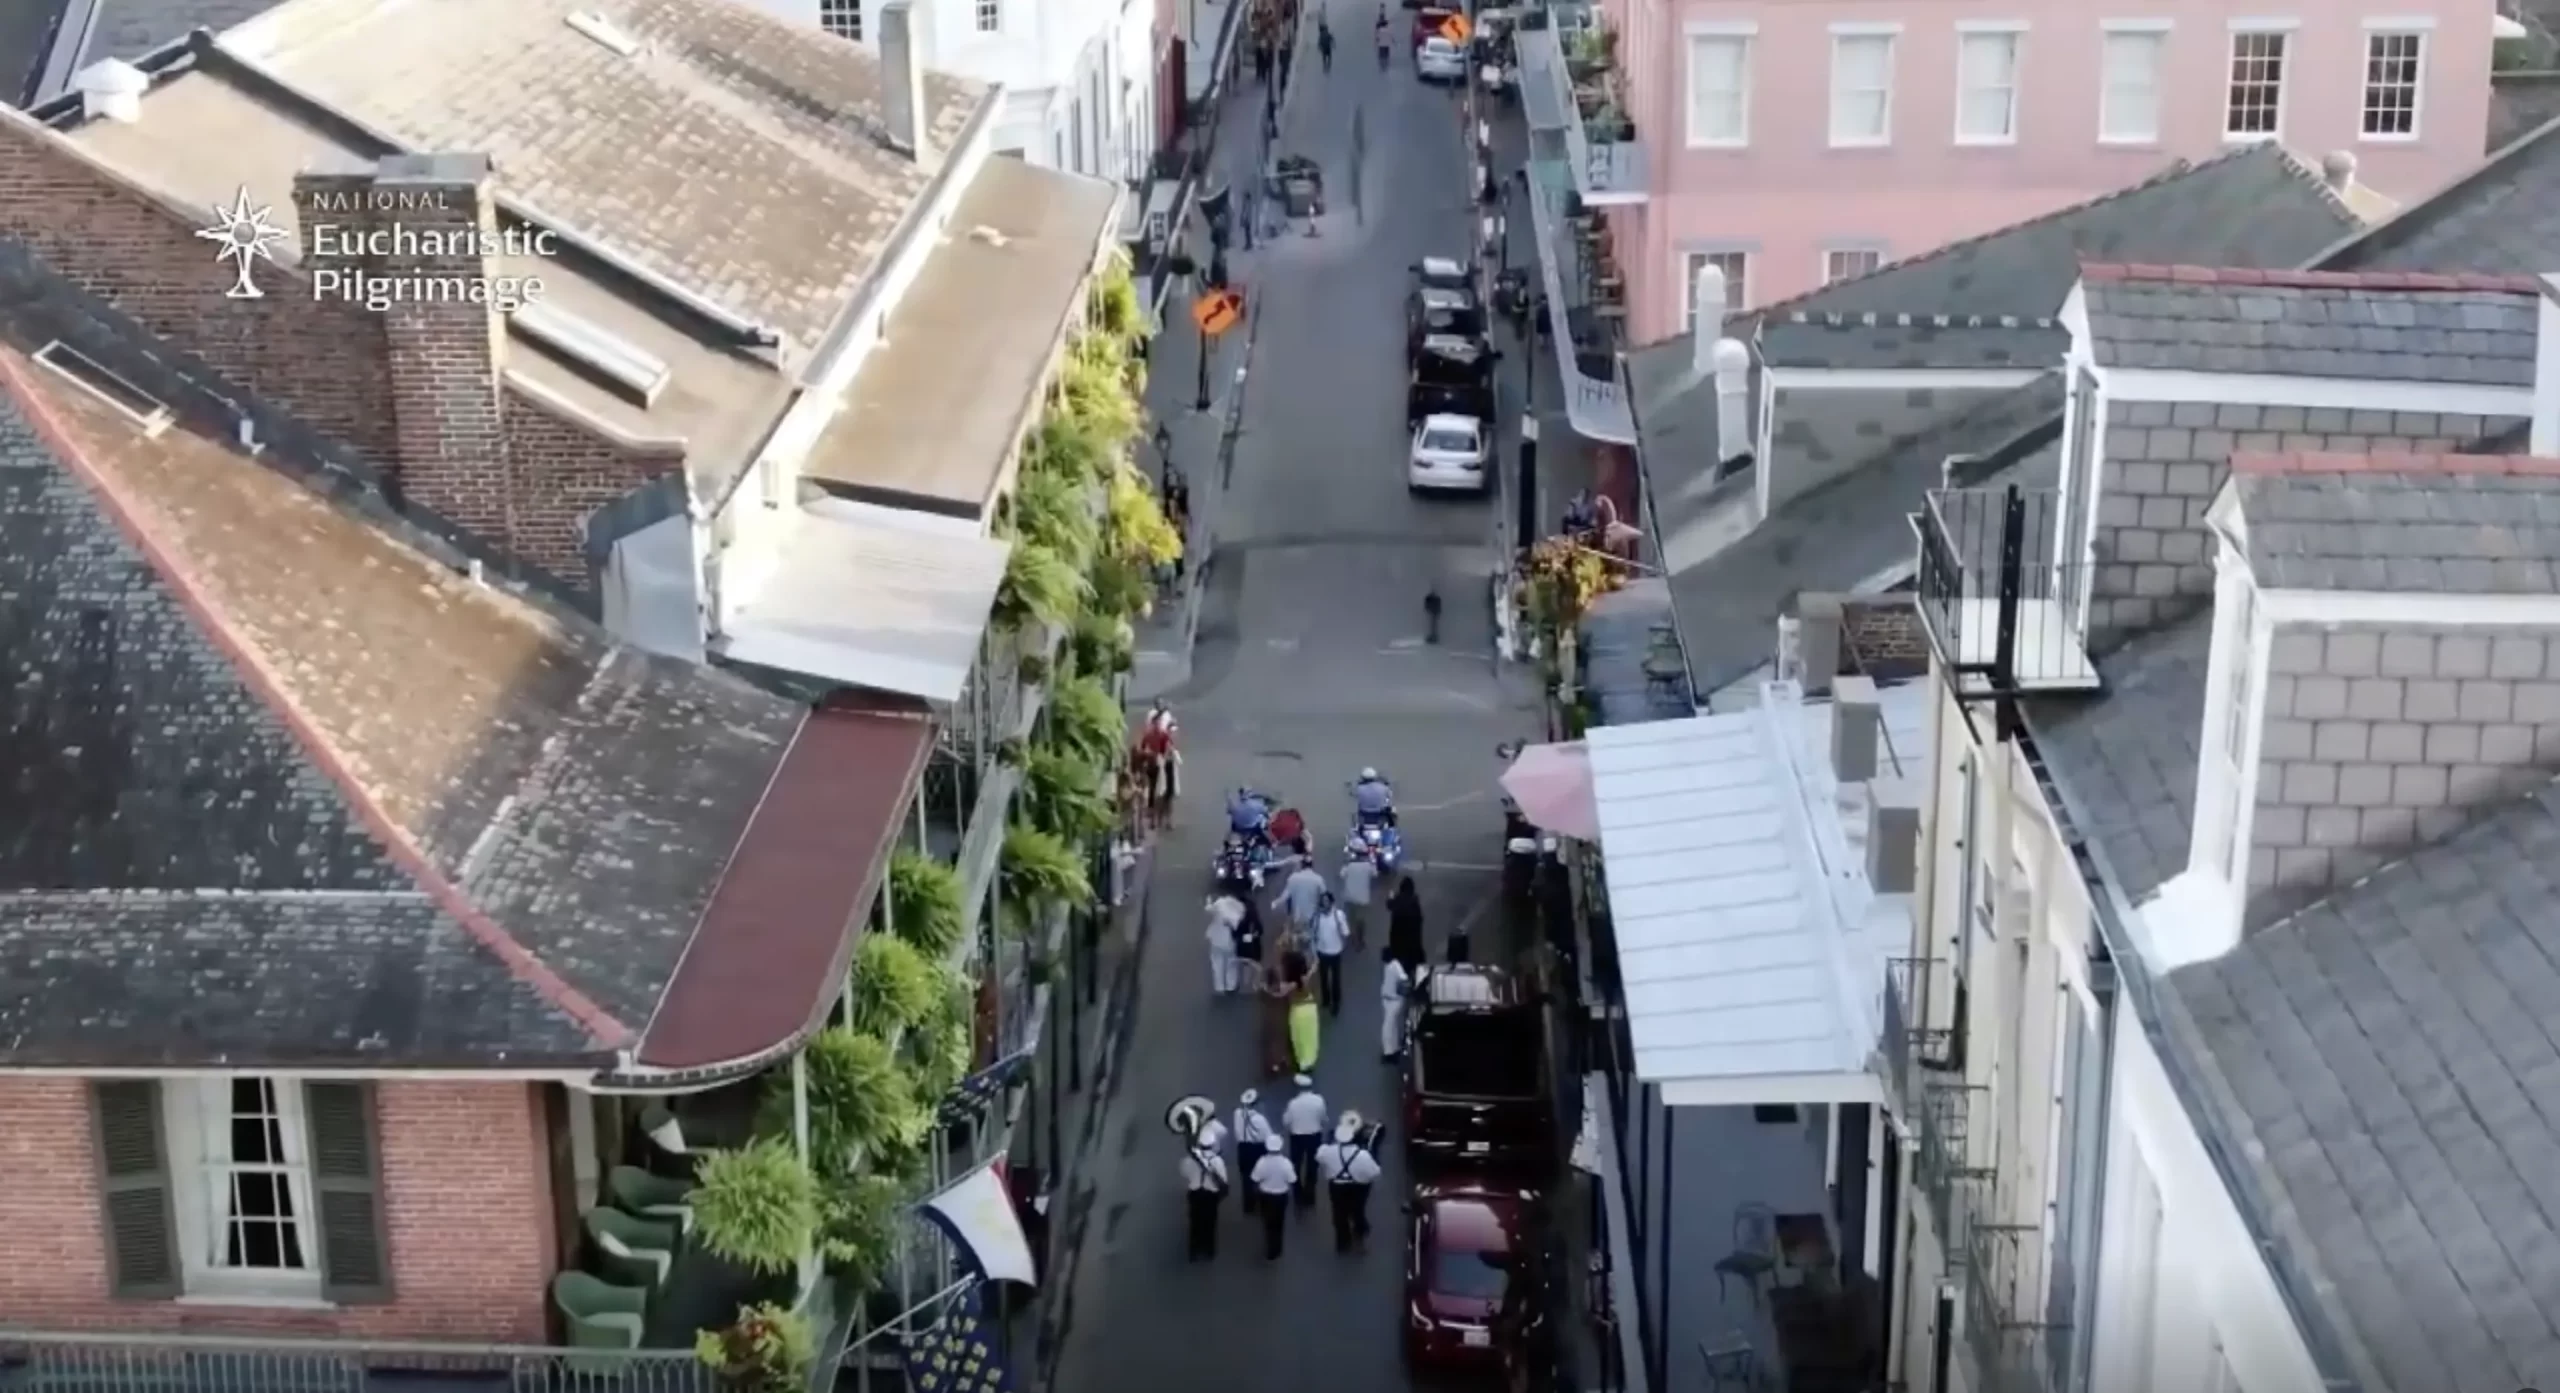 The French Quarter, New Orleans’ oldest neighborhood and the only intact French Colonial and Spanish settlement in the U.S. Credit: Screenshot from EWTN News In Depth